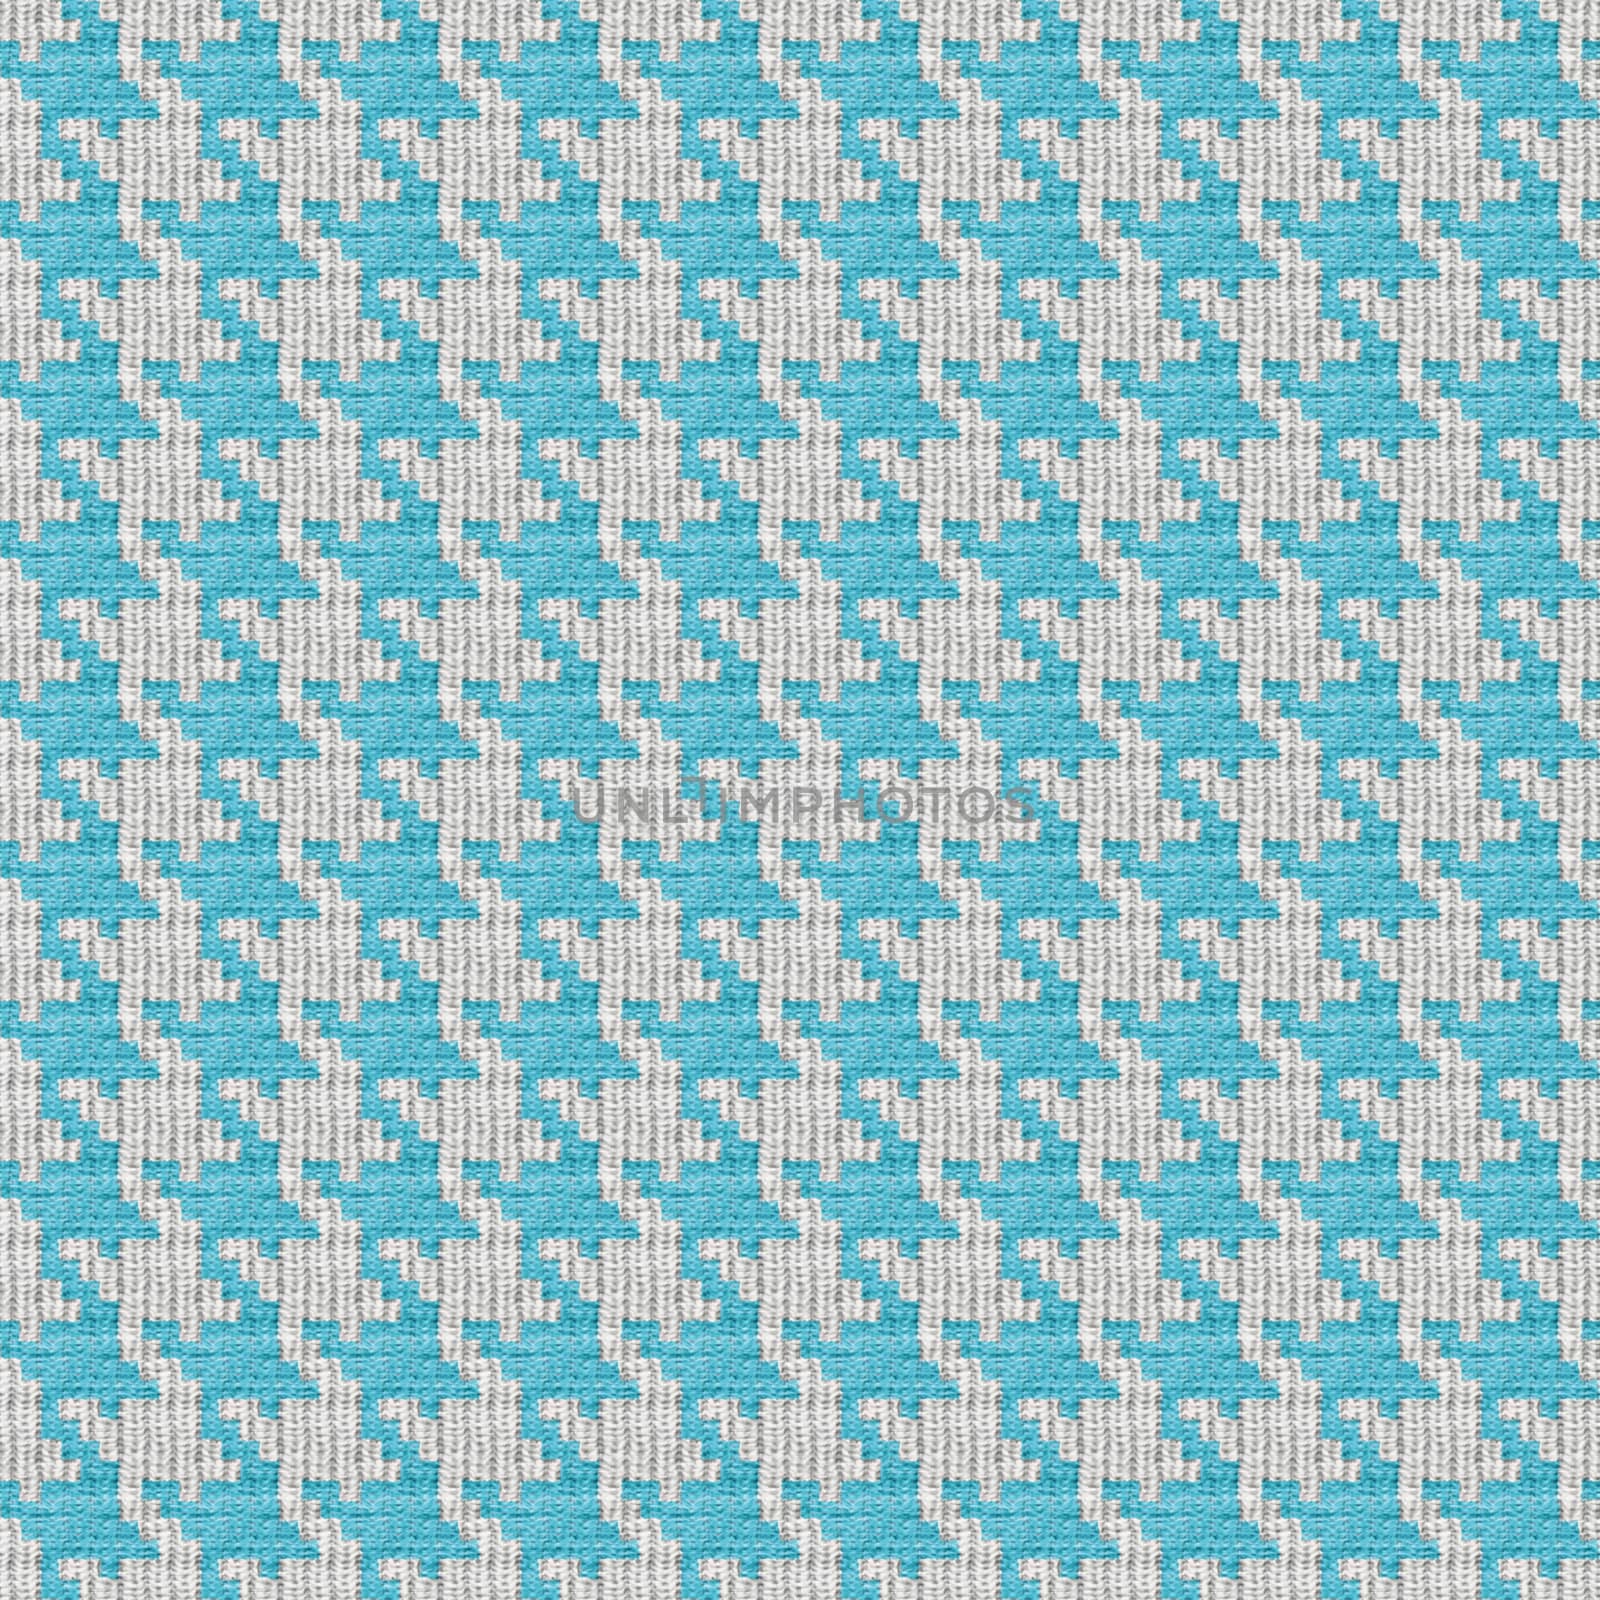 Blue and white seamless houndstooth pattern or texture that tiles seamlessly as a pattern.